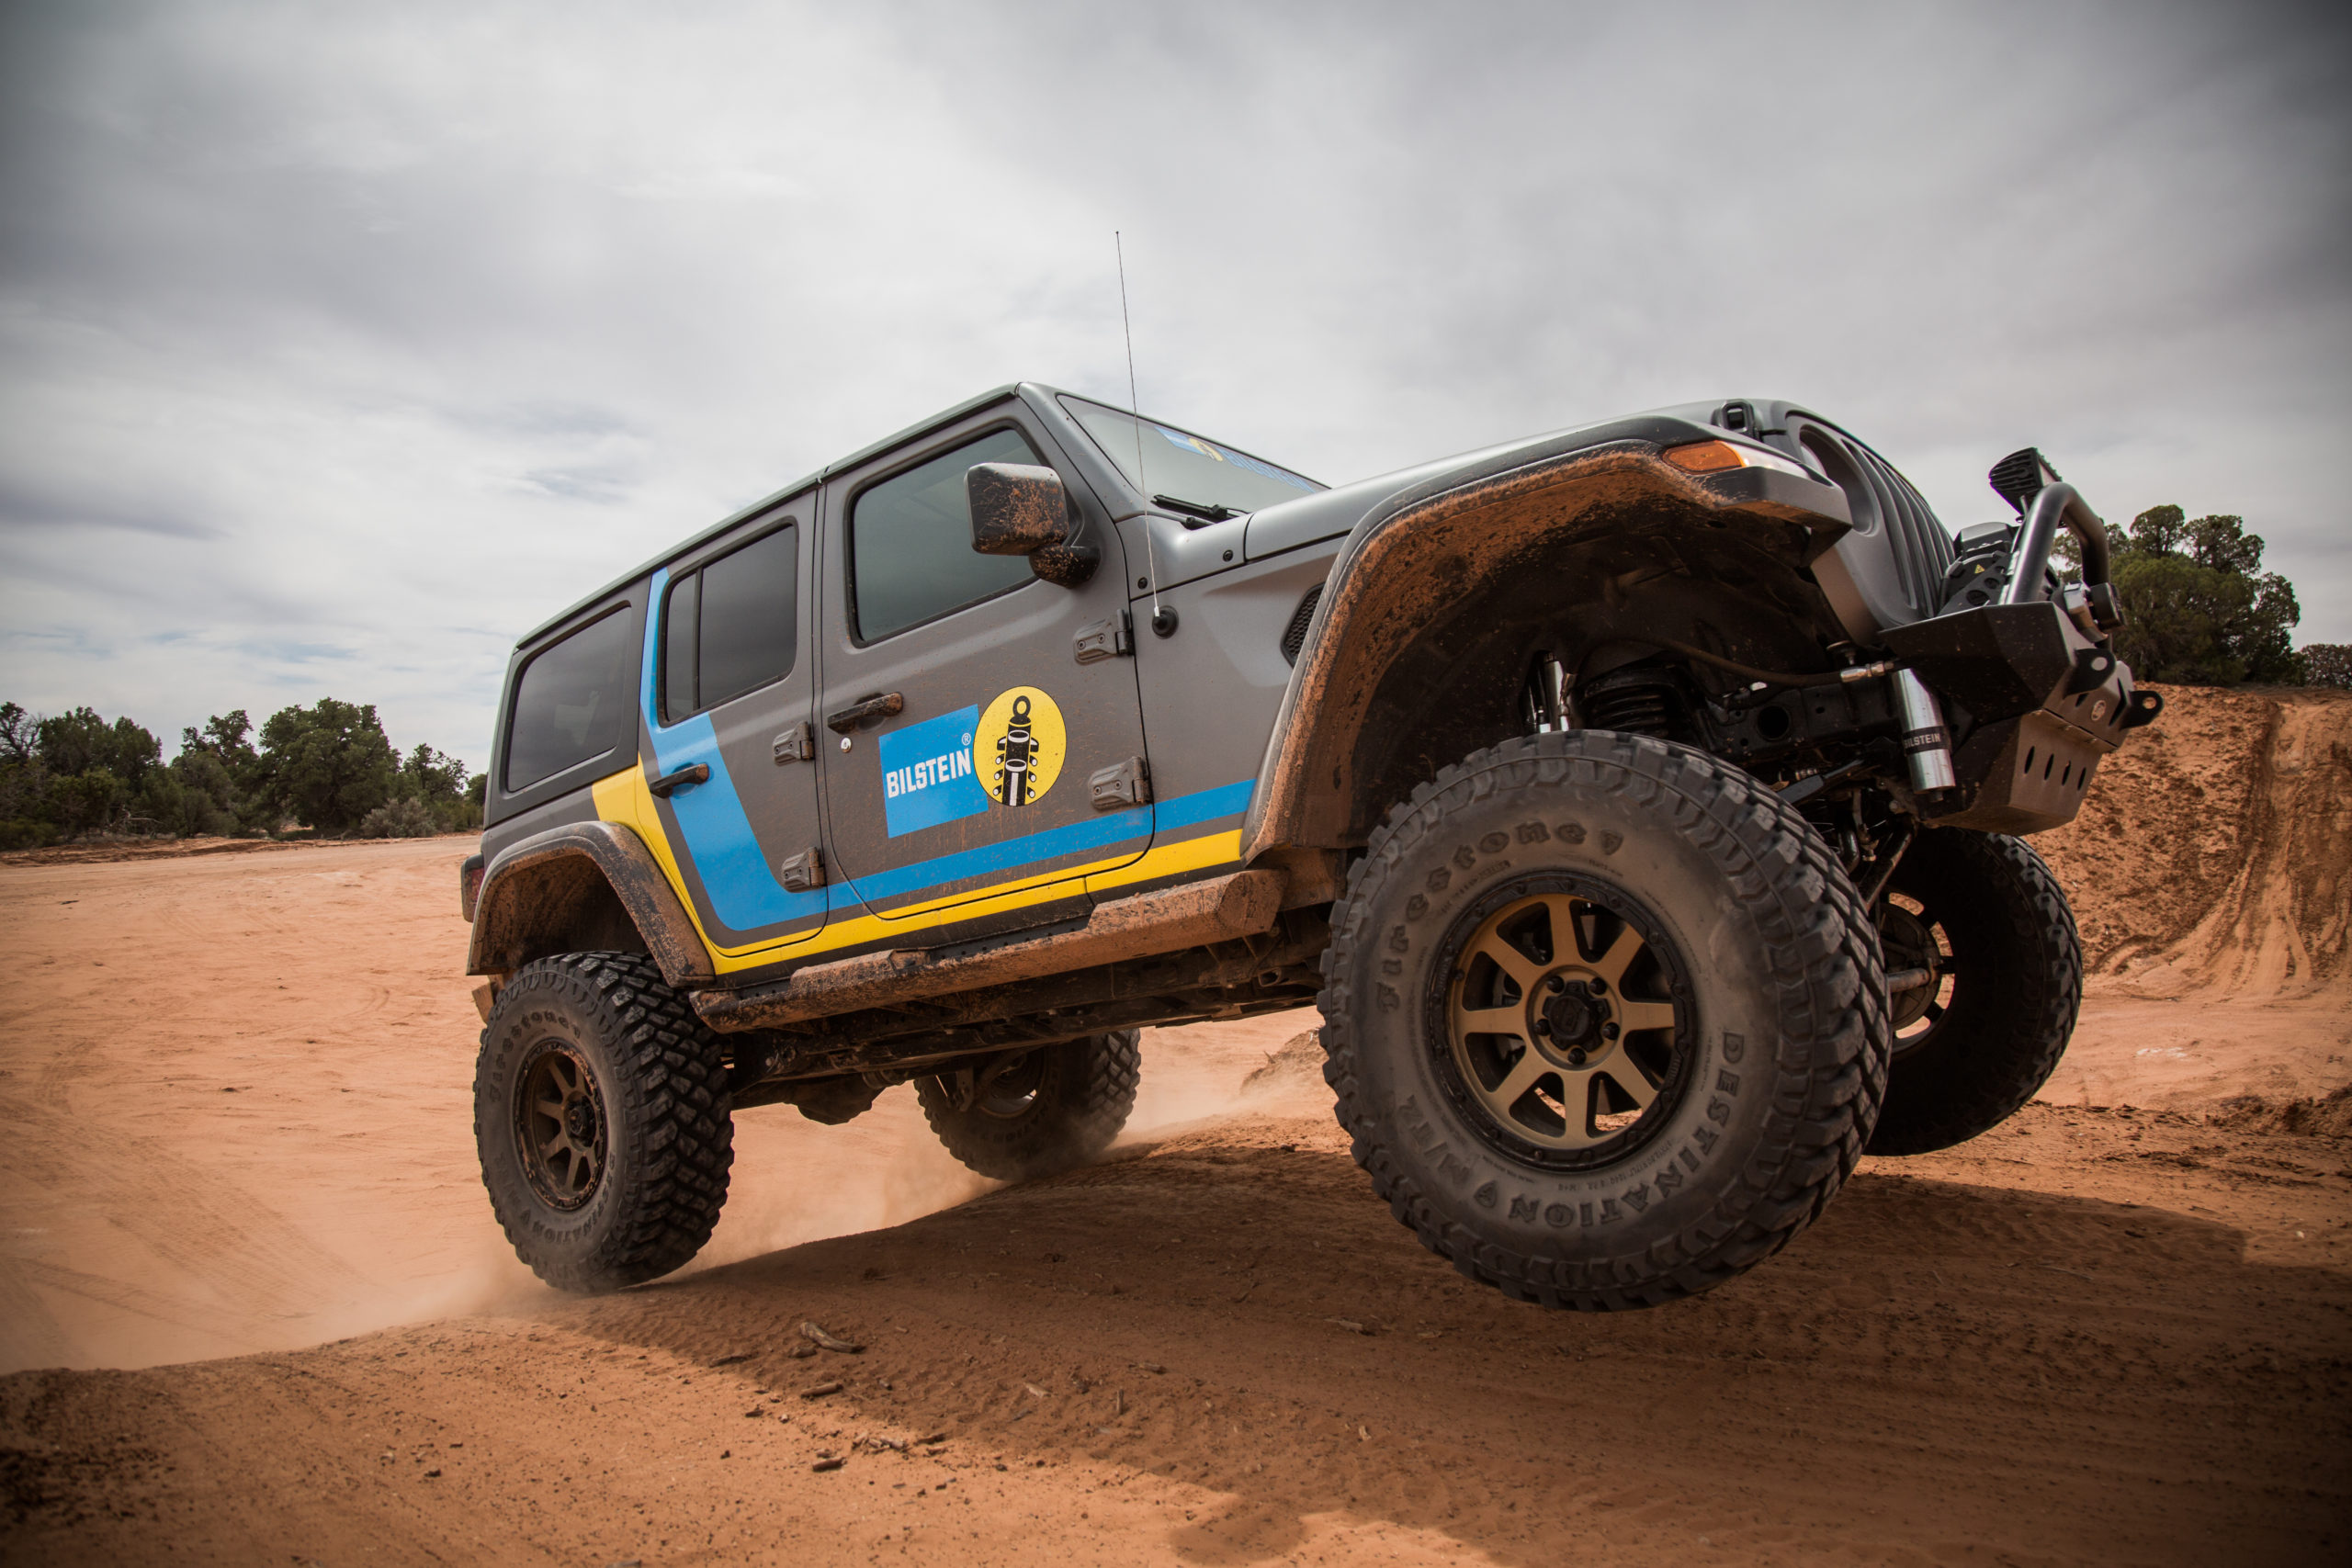 BILSTEIN B8 8100 Direct-Fit Bypass Shocks Now Available for Jeep Wrangler  JL! - CarBuff Network